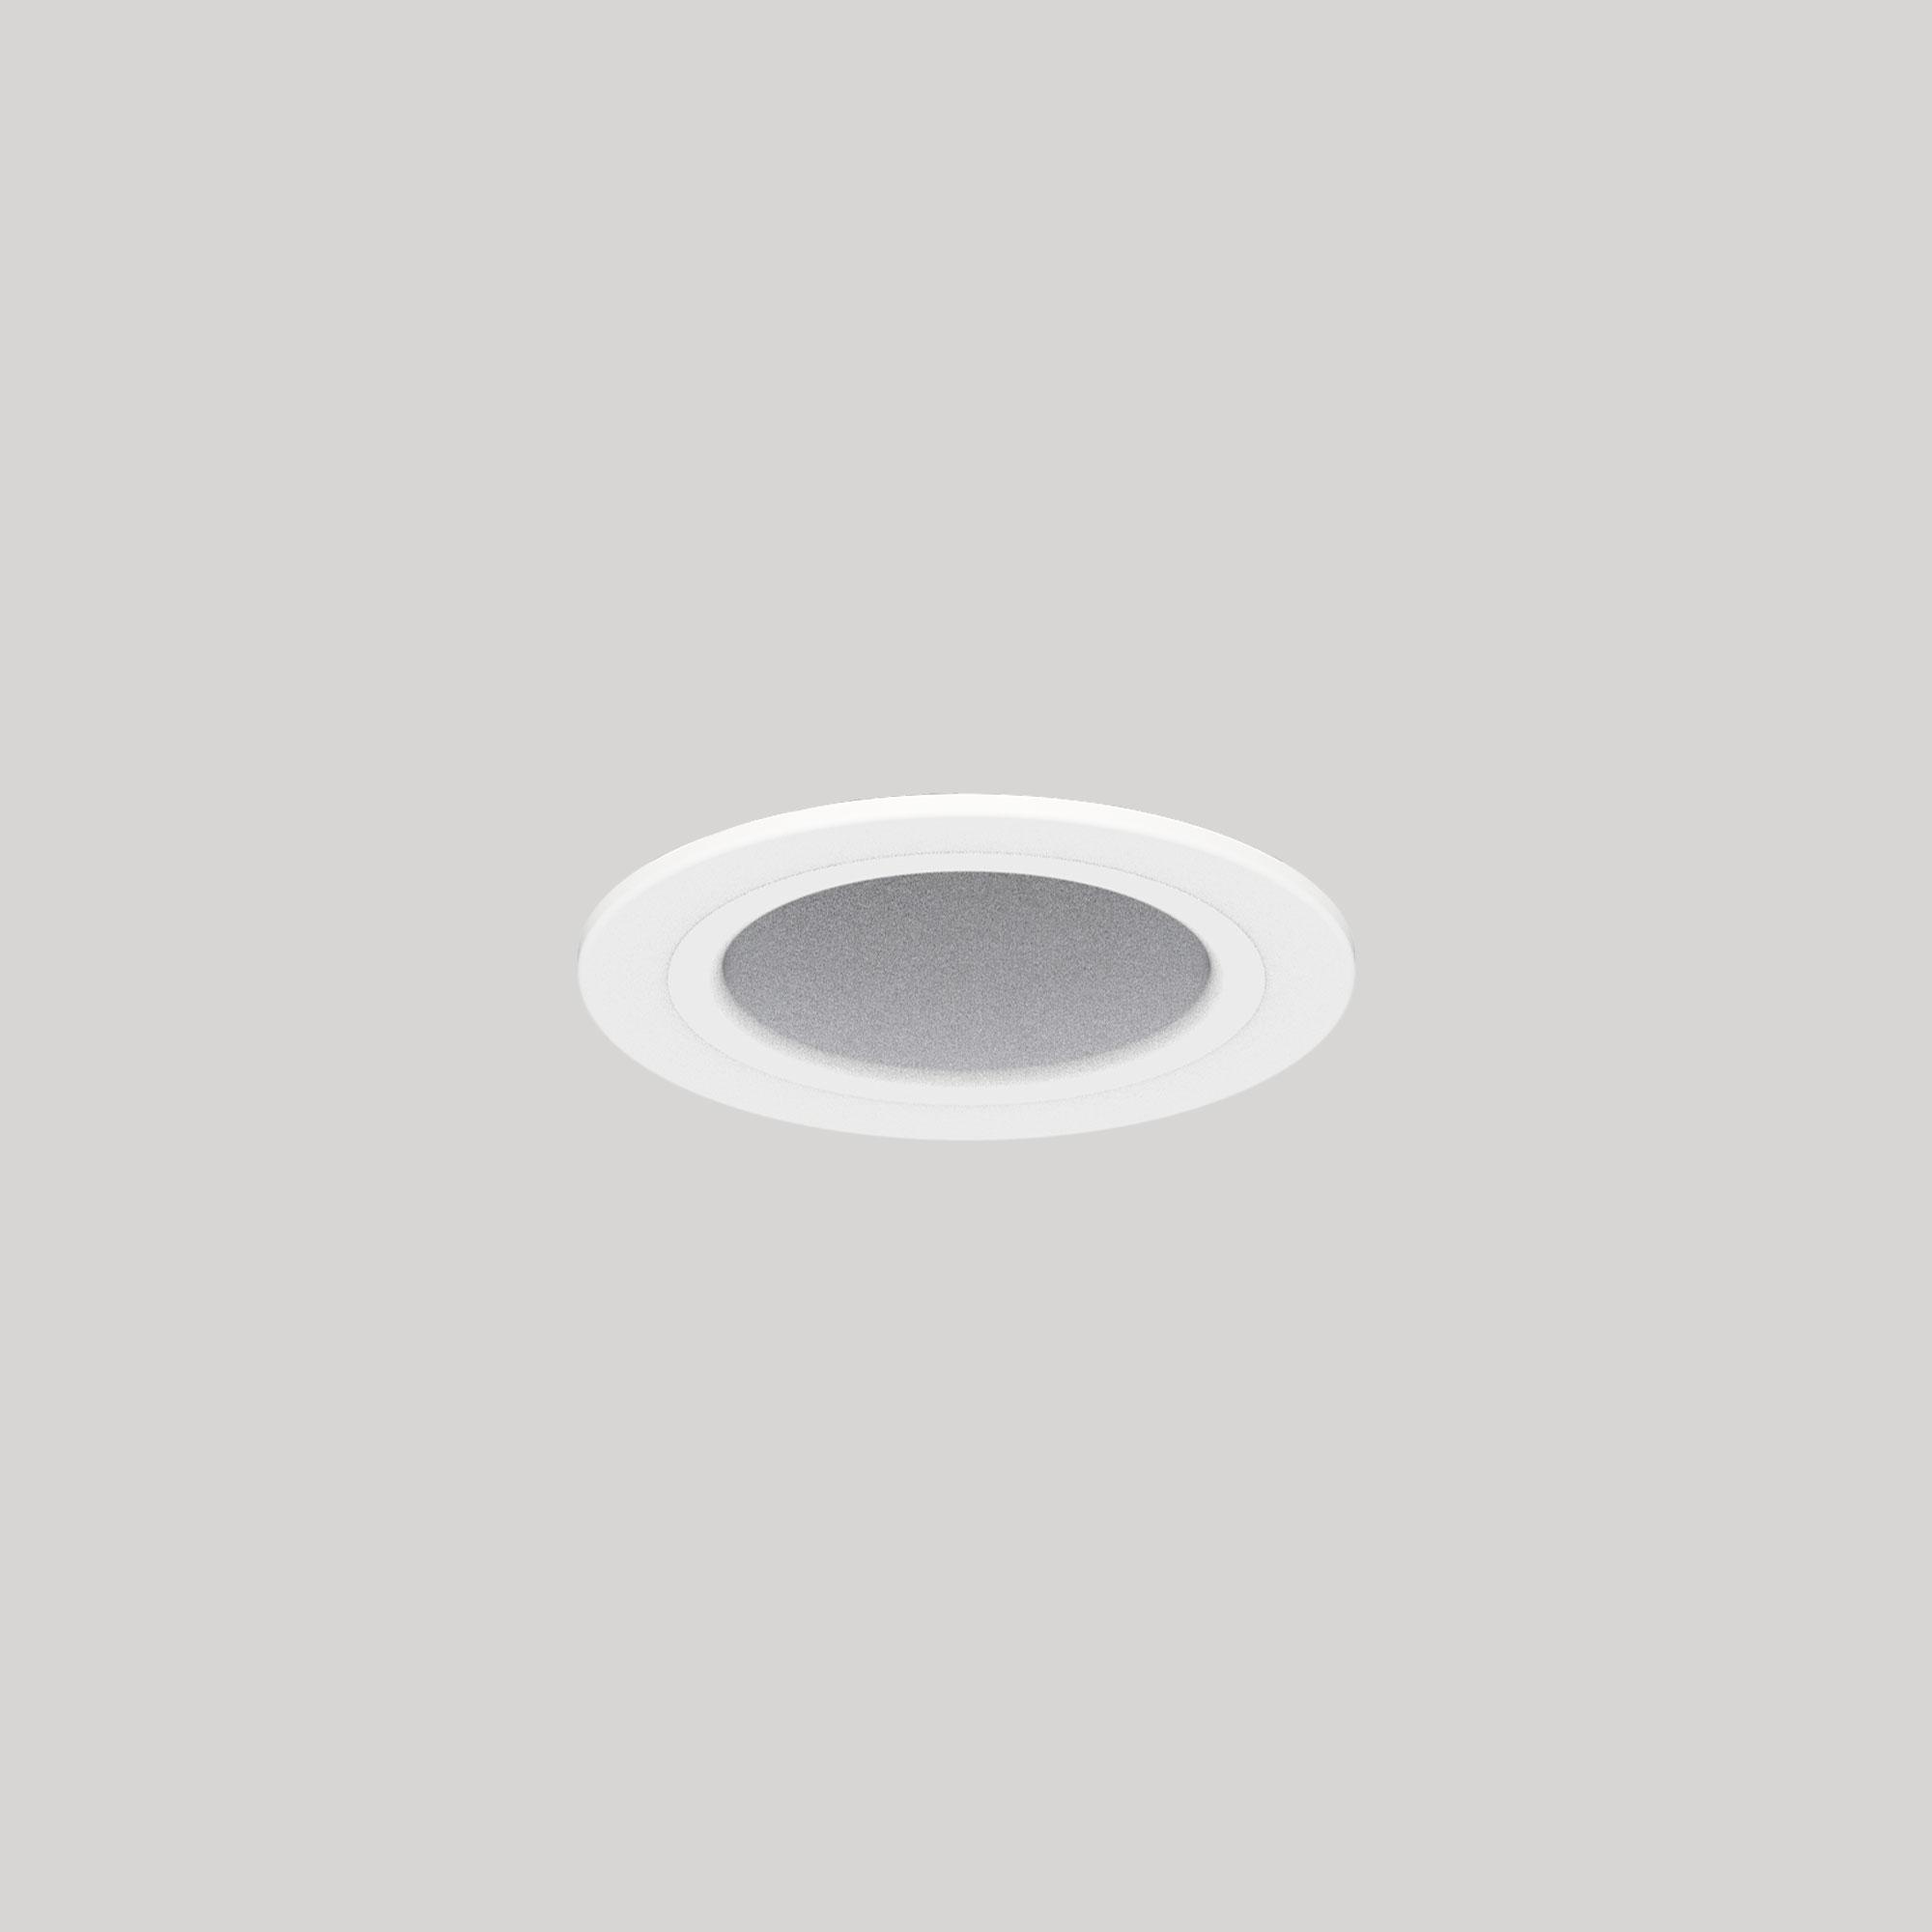 Standard 51mm Ceiling Recessed Round Fixed STD-A00A0C-BBP - Standard-STD-A00-WW-Installed.jpg